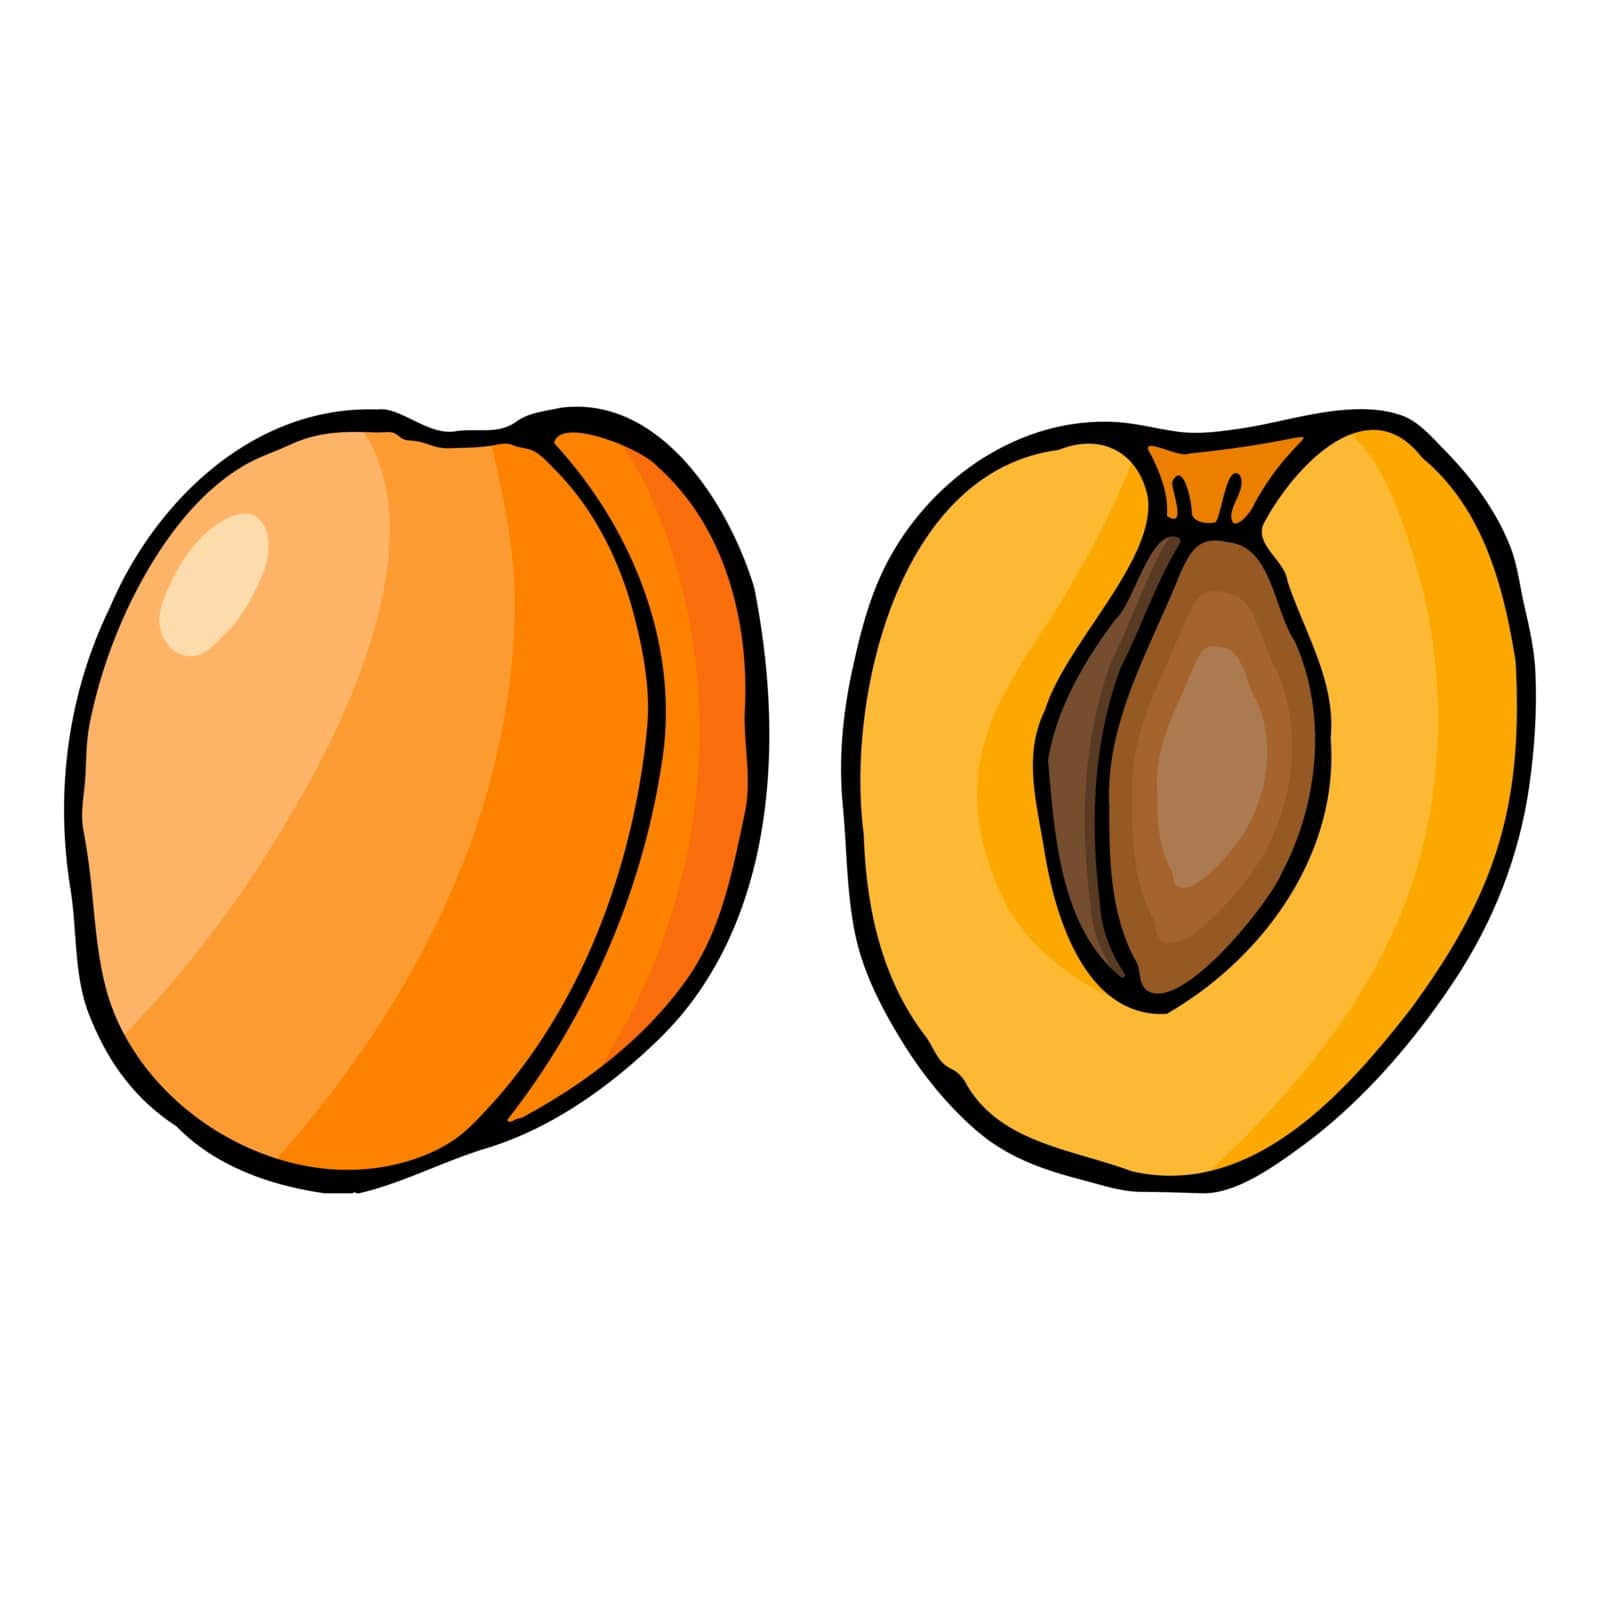 Apricot with kernel. Hand drawn outline doodle icon. Colorful isolated on white background. Vector illustration for greeting cards, posters, patches, prints for clothes, emblems.